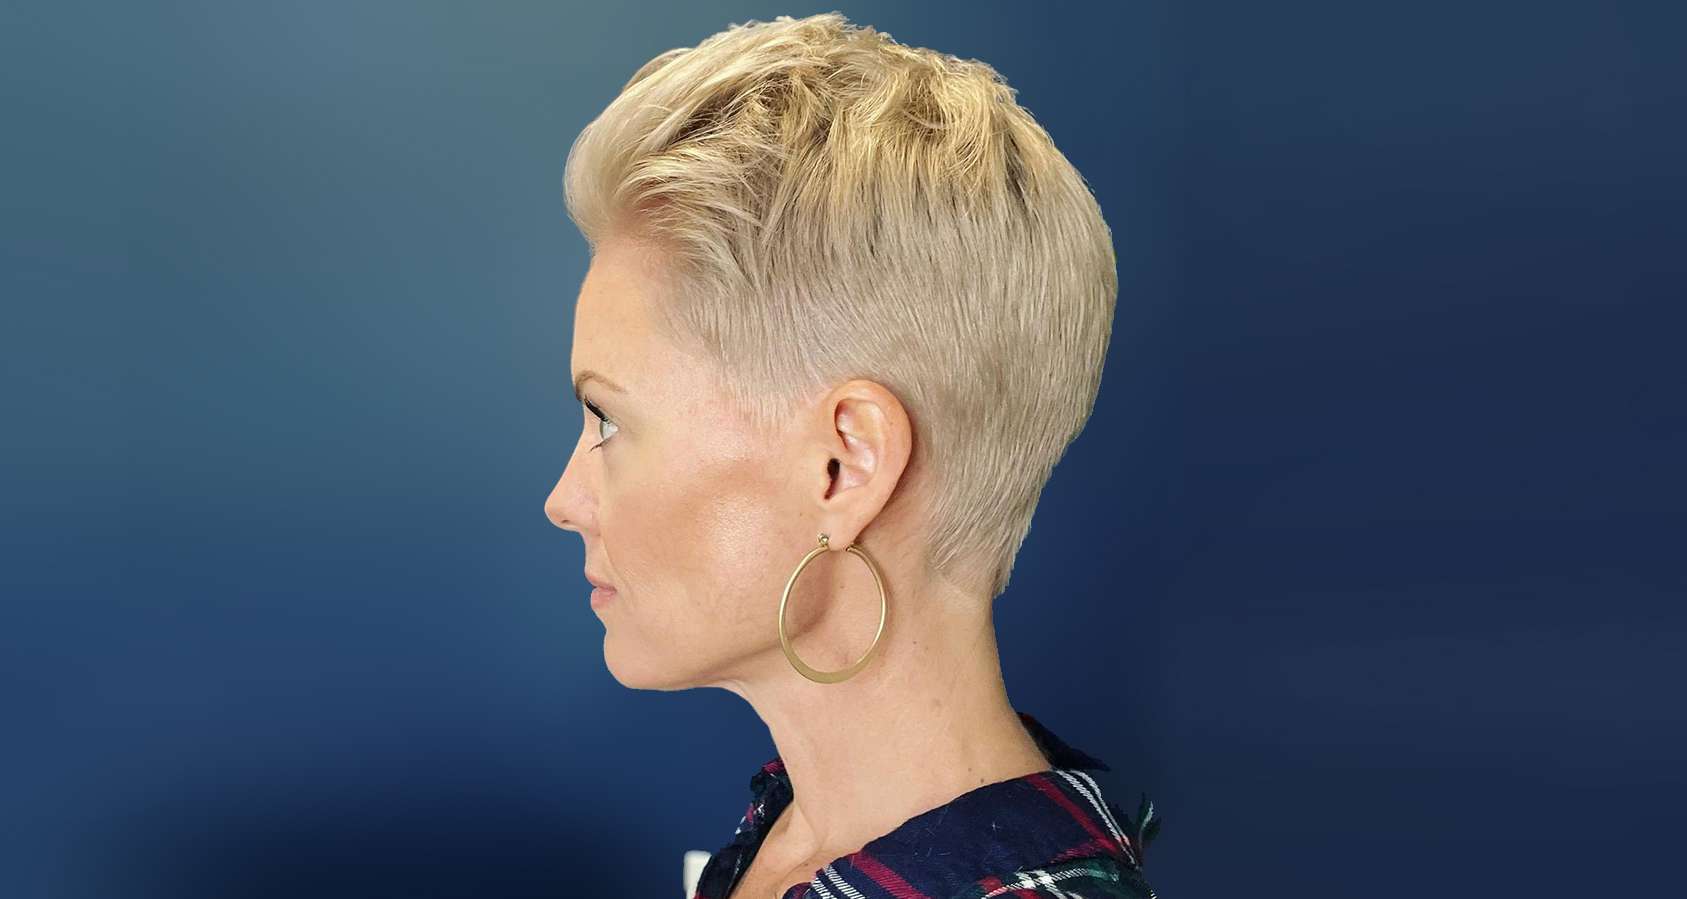 Shannon Carver Short Hairstyles